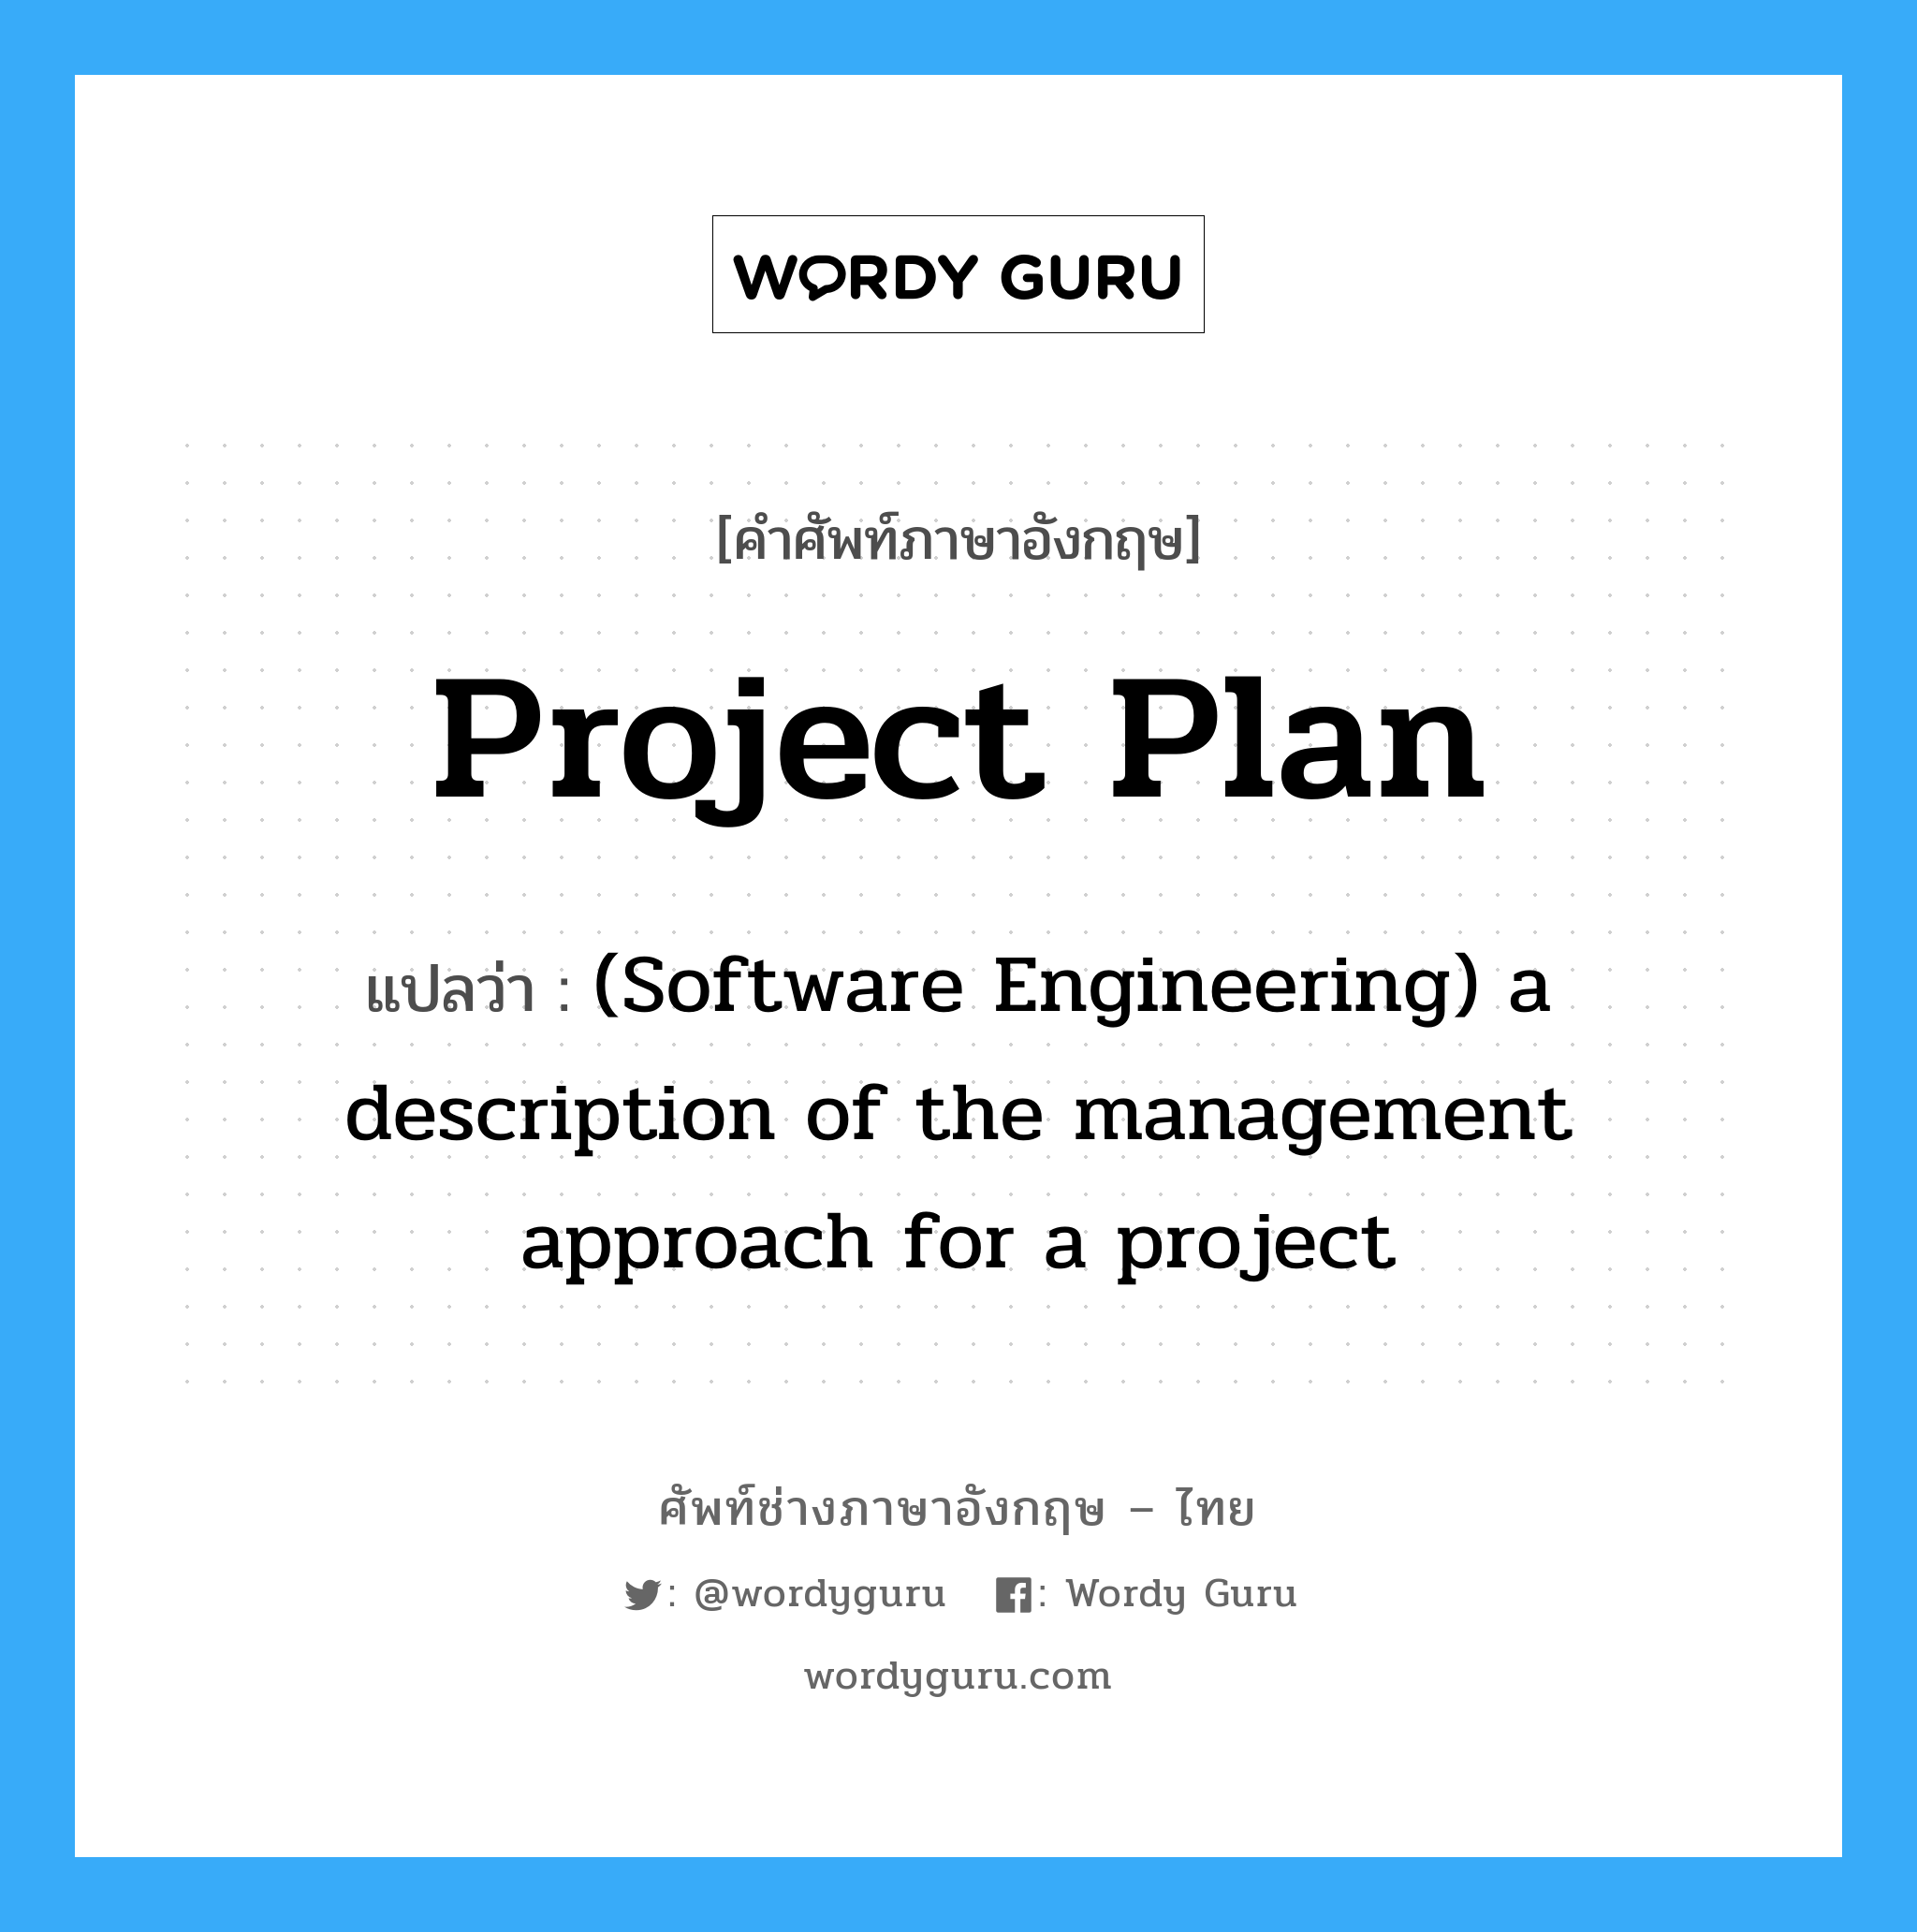 Project Plan แปลว่า?, คำศัพท์ช่างภาษาอังกฤษ - ไทย Project Plan คำศัพท์ภาษาอังกฤษ Project Plan แปลว่า (Software Engineering) a description of the management approach for a project